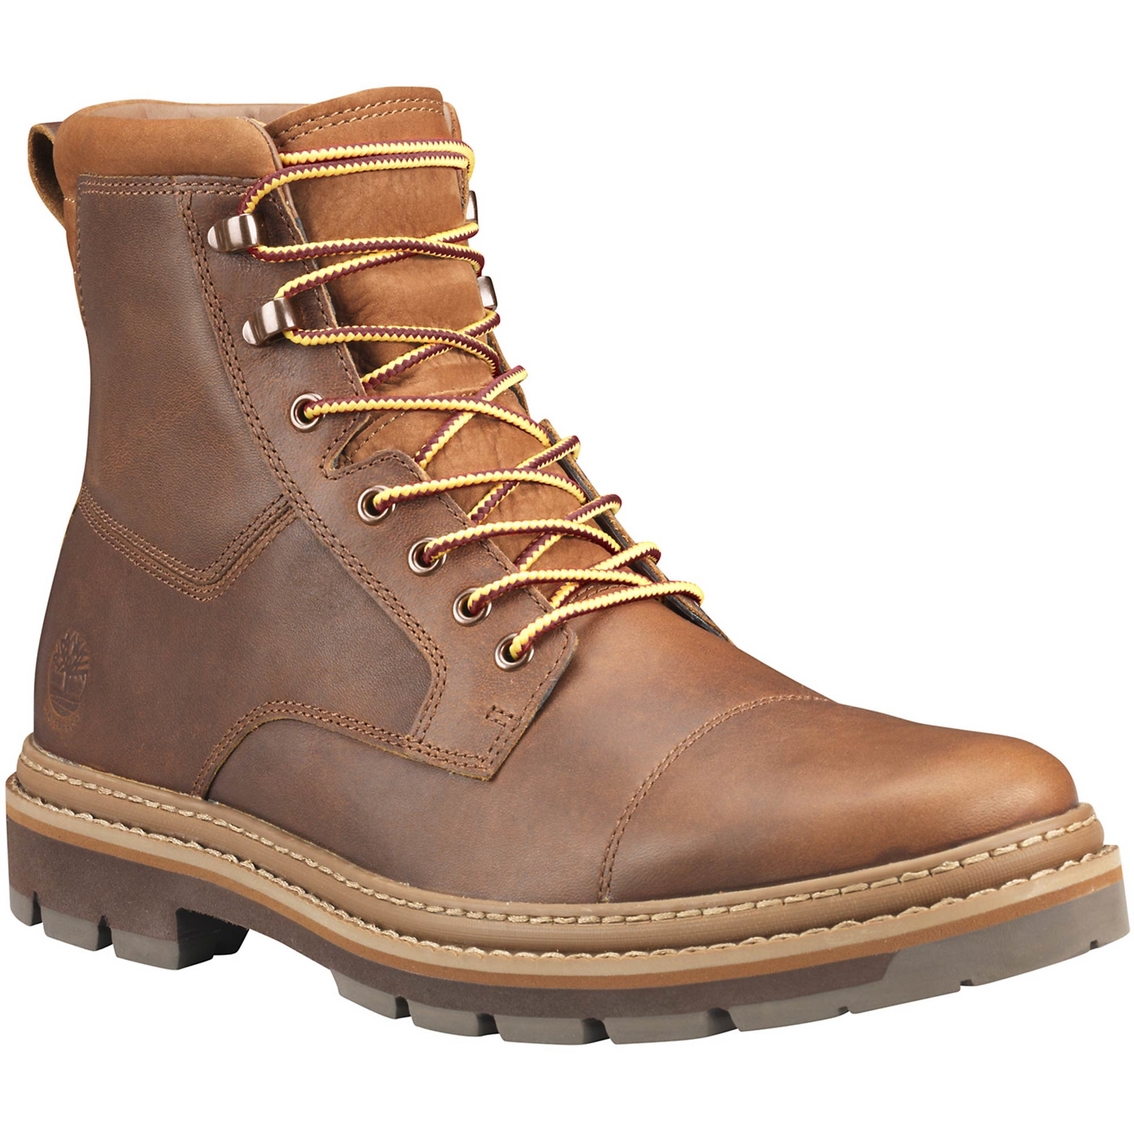 Timberland Port Union Waterproof Insulated Boots | Casuals | Shoes ...